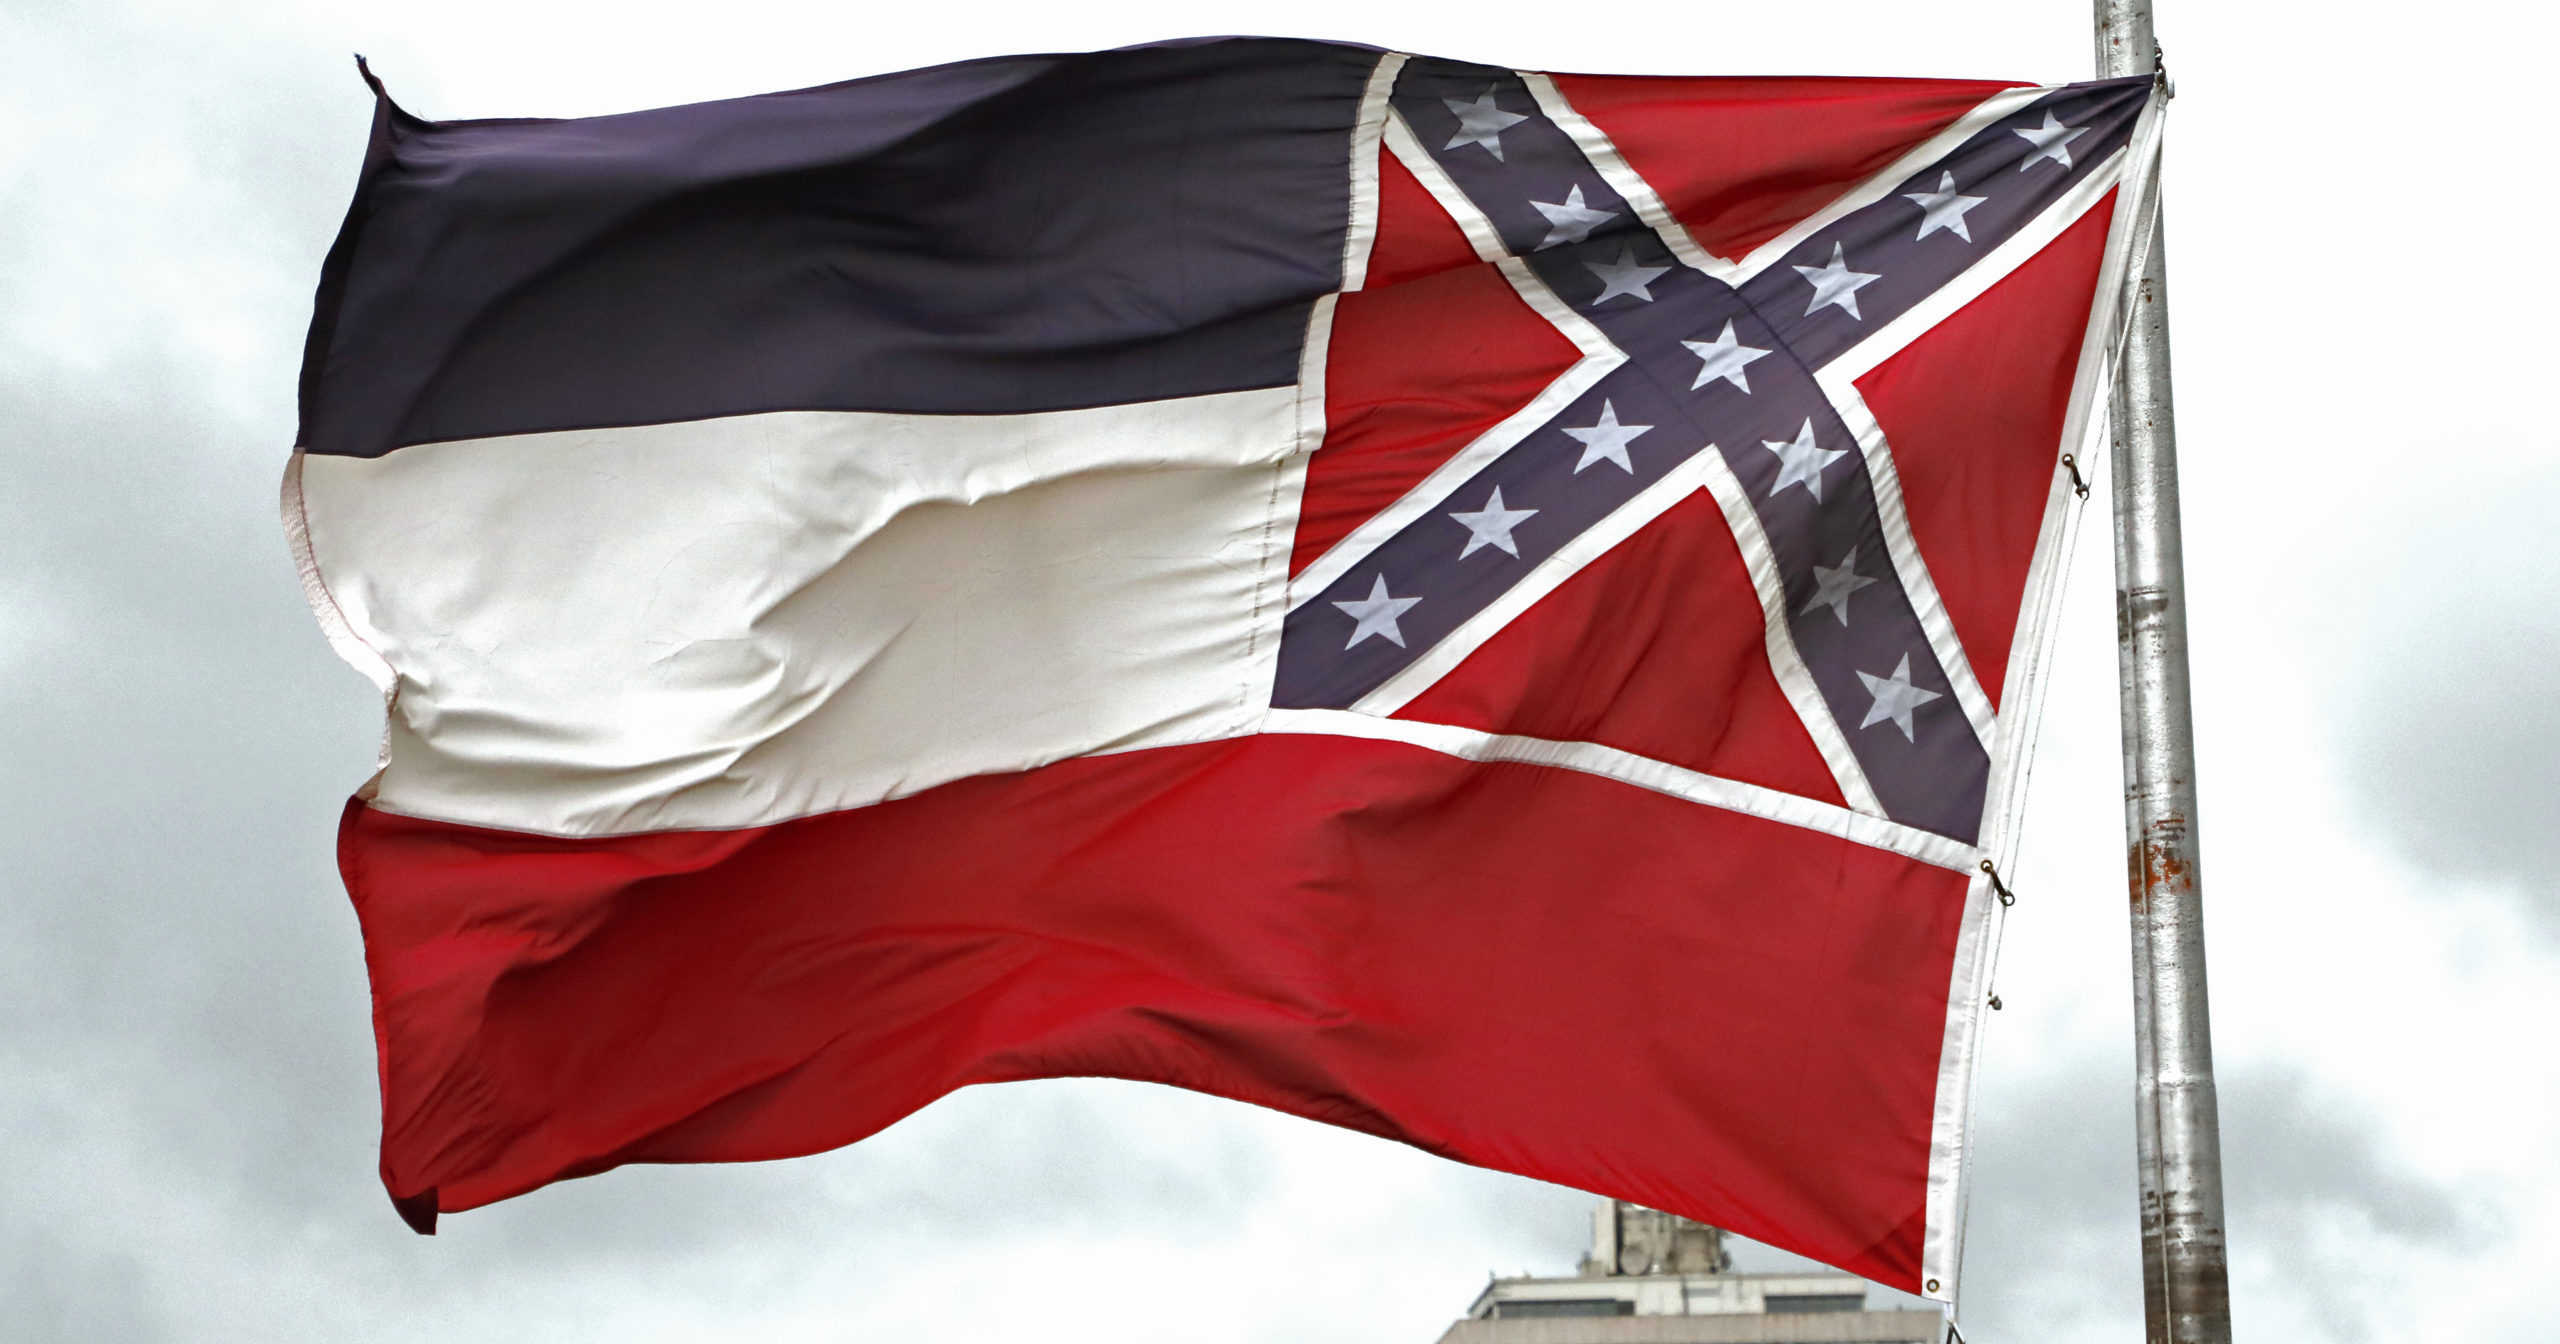 A Mississippi state flag flies outside the Capitol in Jackson, Mississippi, on June 25, 2020.